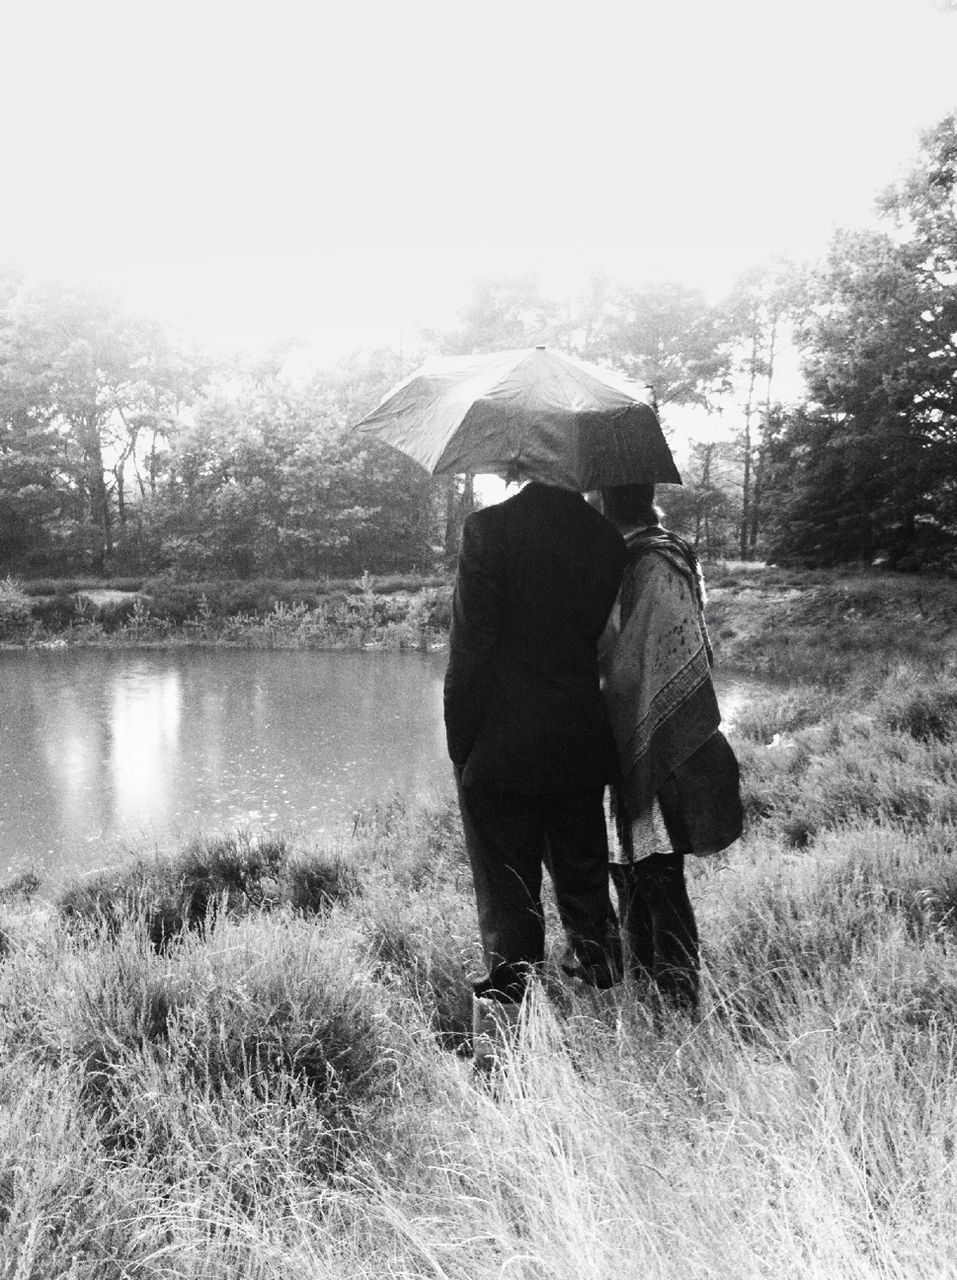 Man and woman under umbrella on grassy field by pond